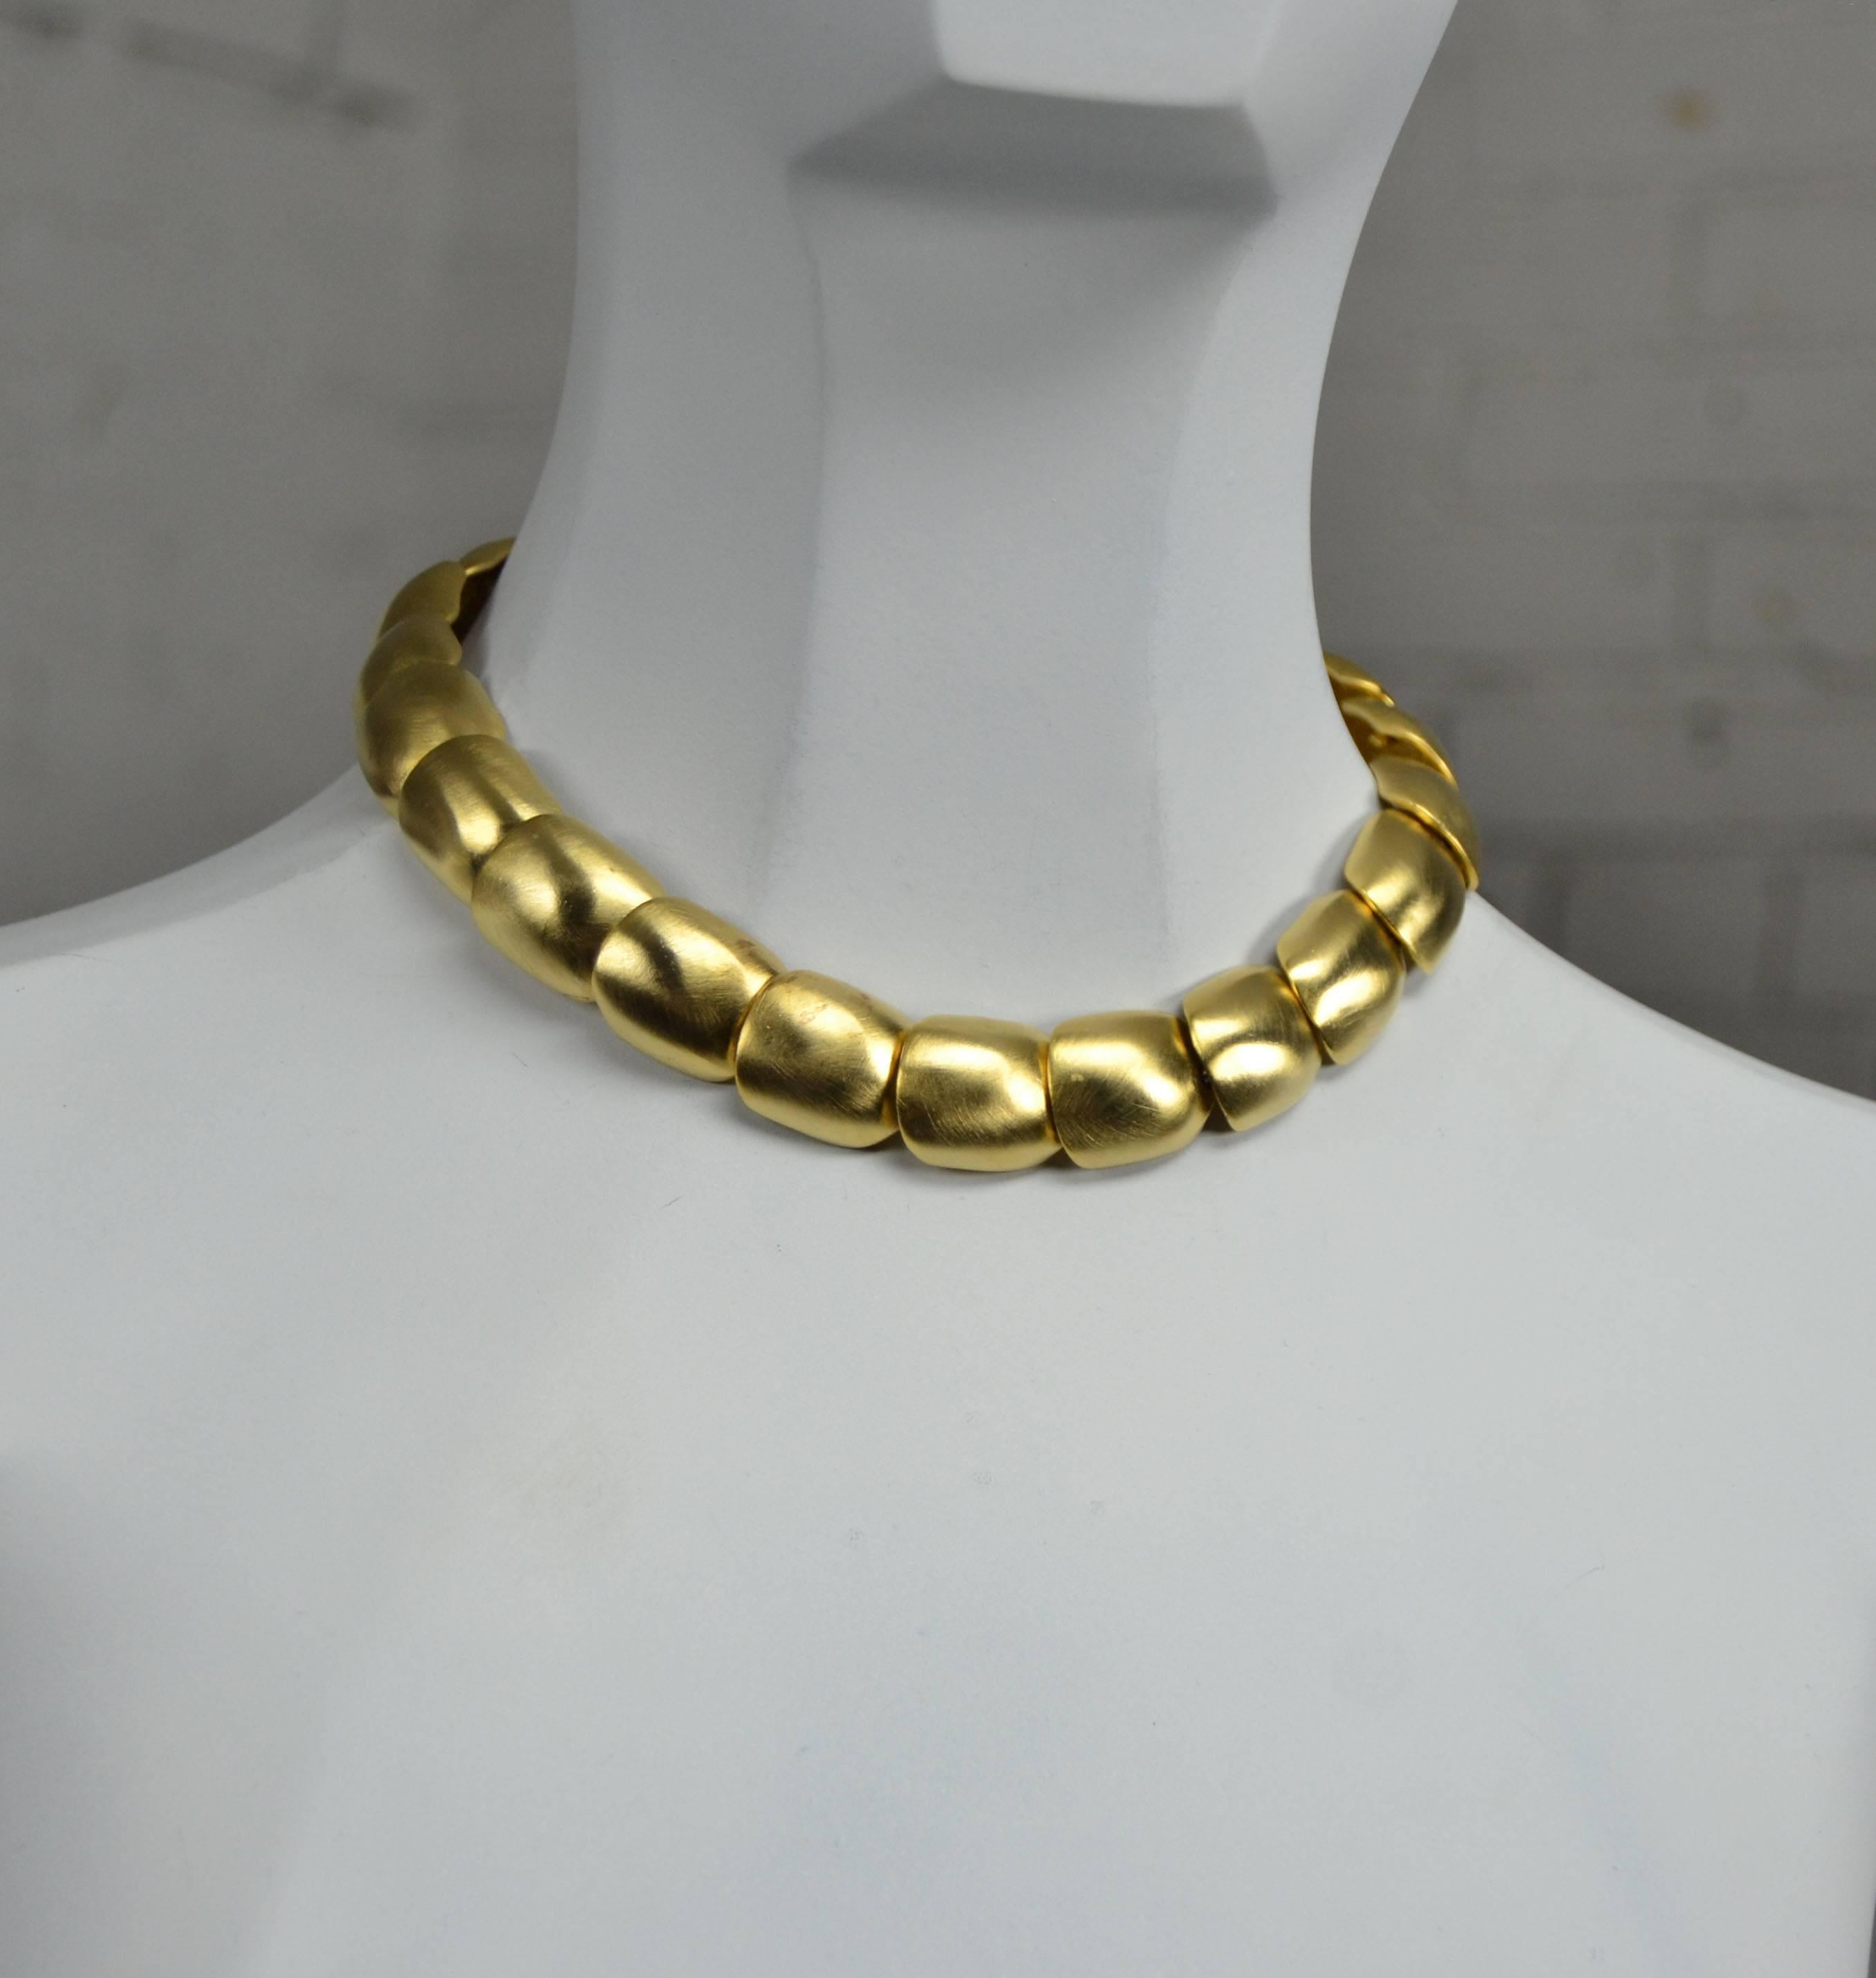 Stunning circa 1990s gold-tone choker necklace and cuff bracelet with brushed or matte finish by Clara Studio Inc. The set is in wonderful vintage condition. See long description for details.

What a gorgeous choker necklace and bracelet circa